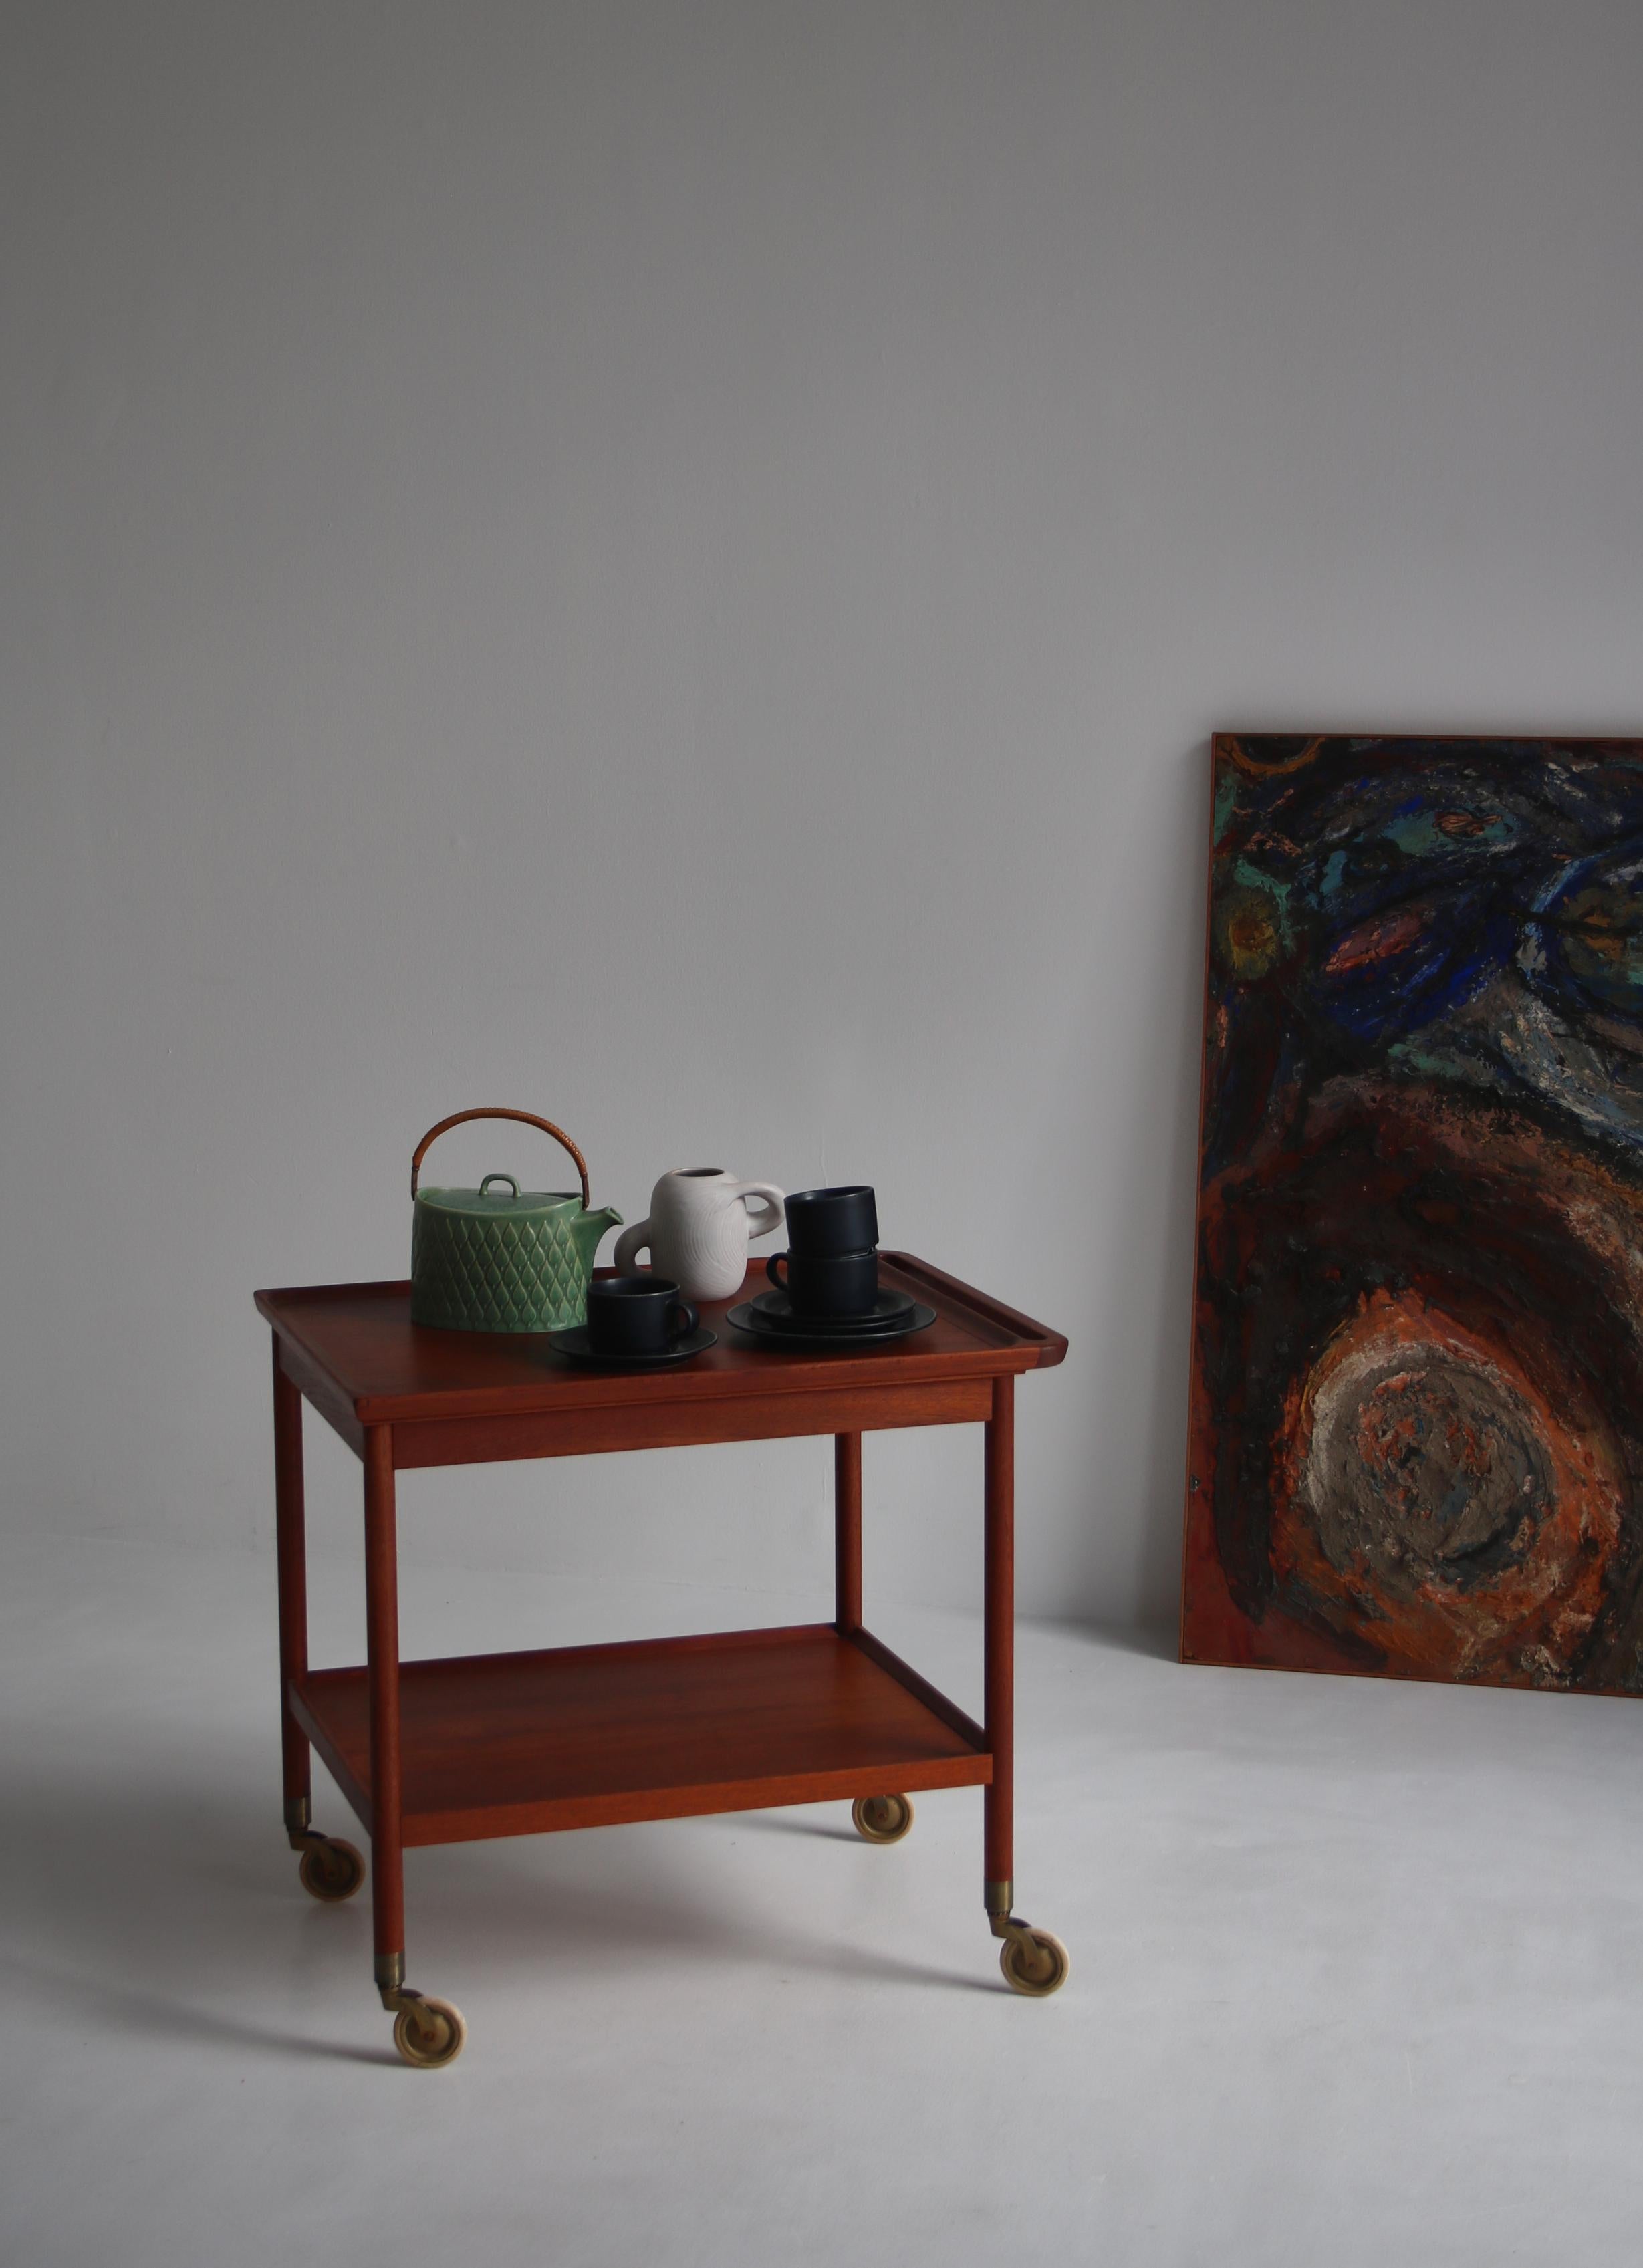 Danish master cabinetmaker Ludvig Pontoppidan designed and executed this wonderful teakwood and brass serving trolley in the 1960s. Clean minimal lines with a subtle handle on one end which adds organic depth and character. The brass casters give an